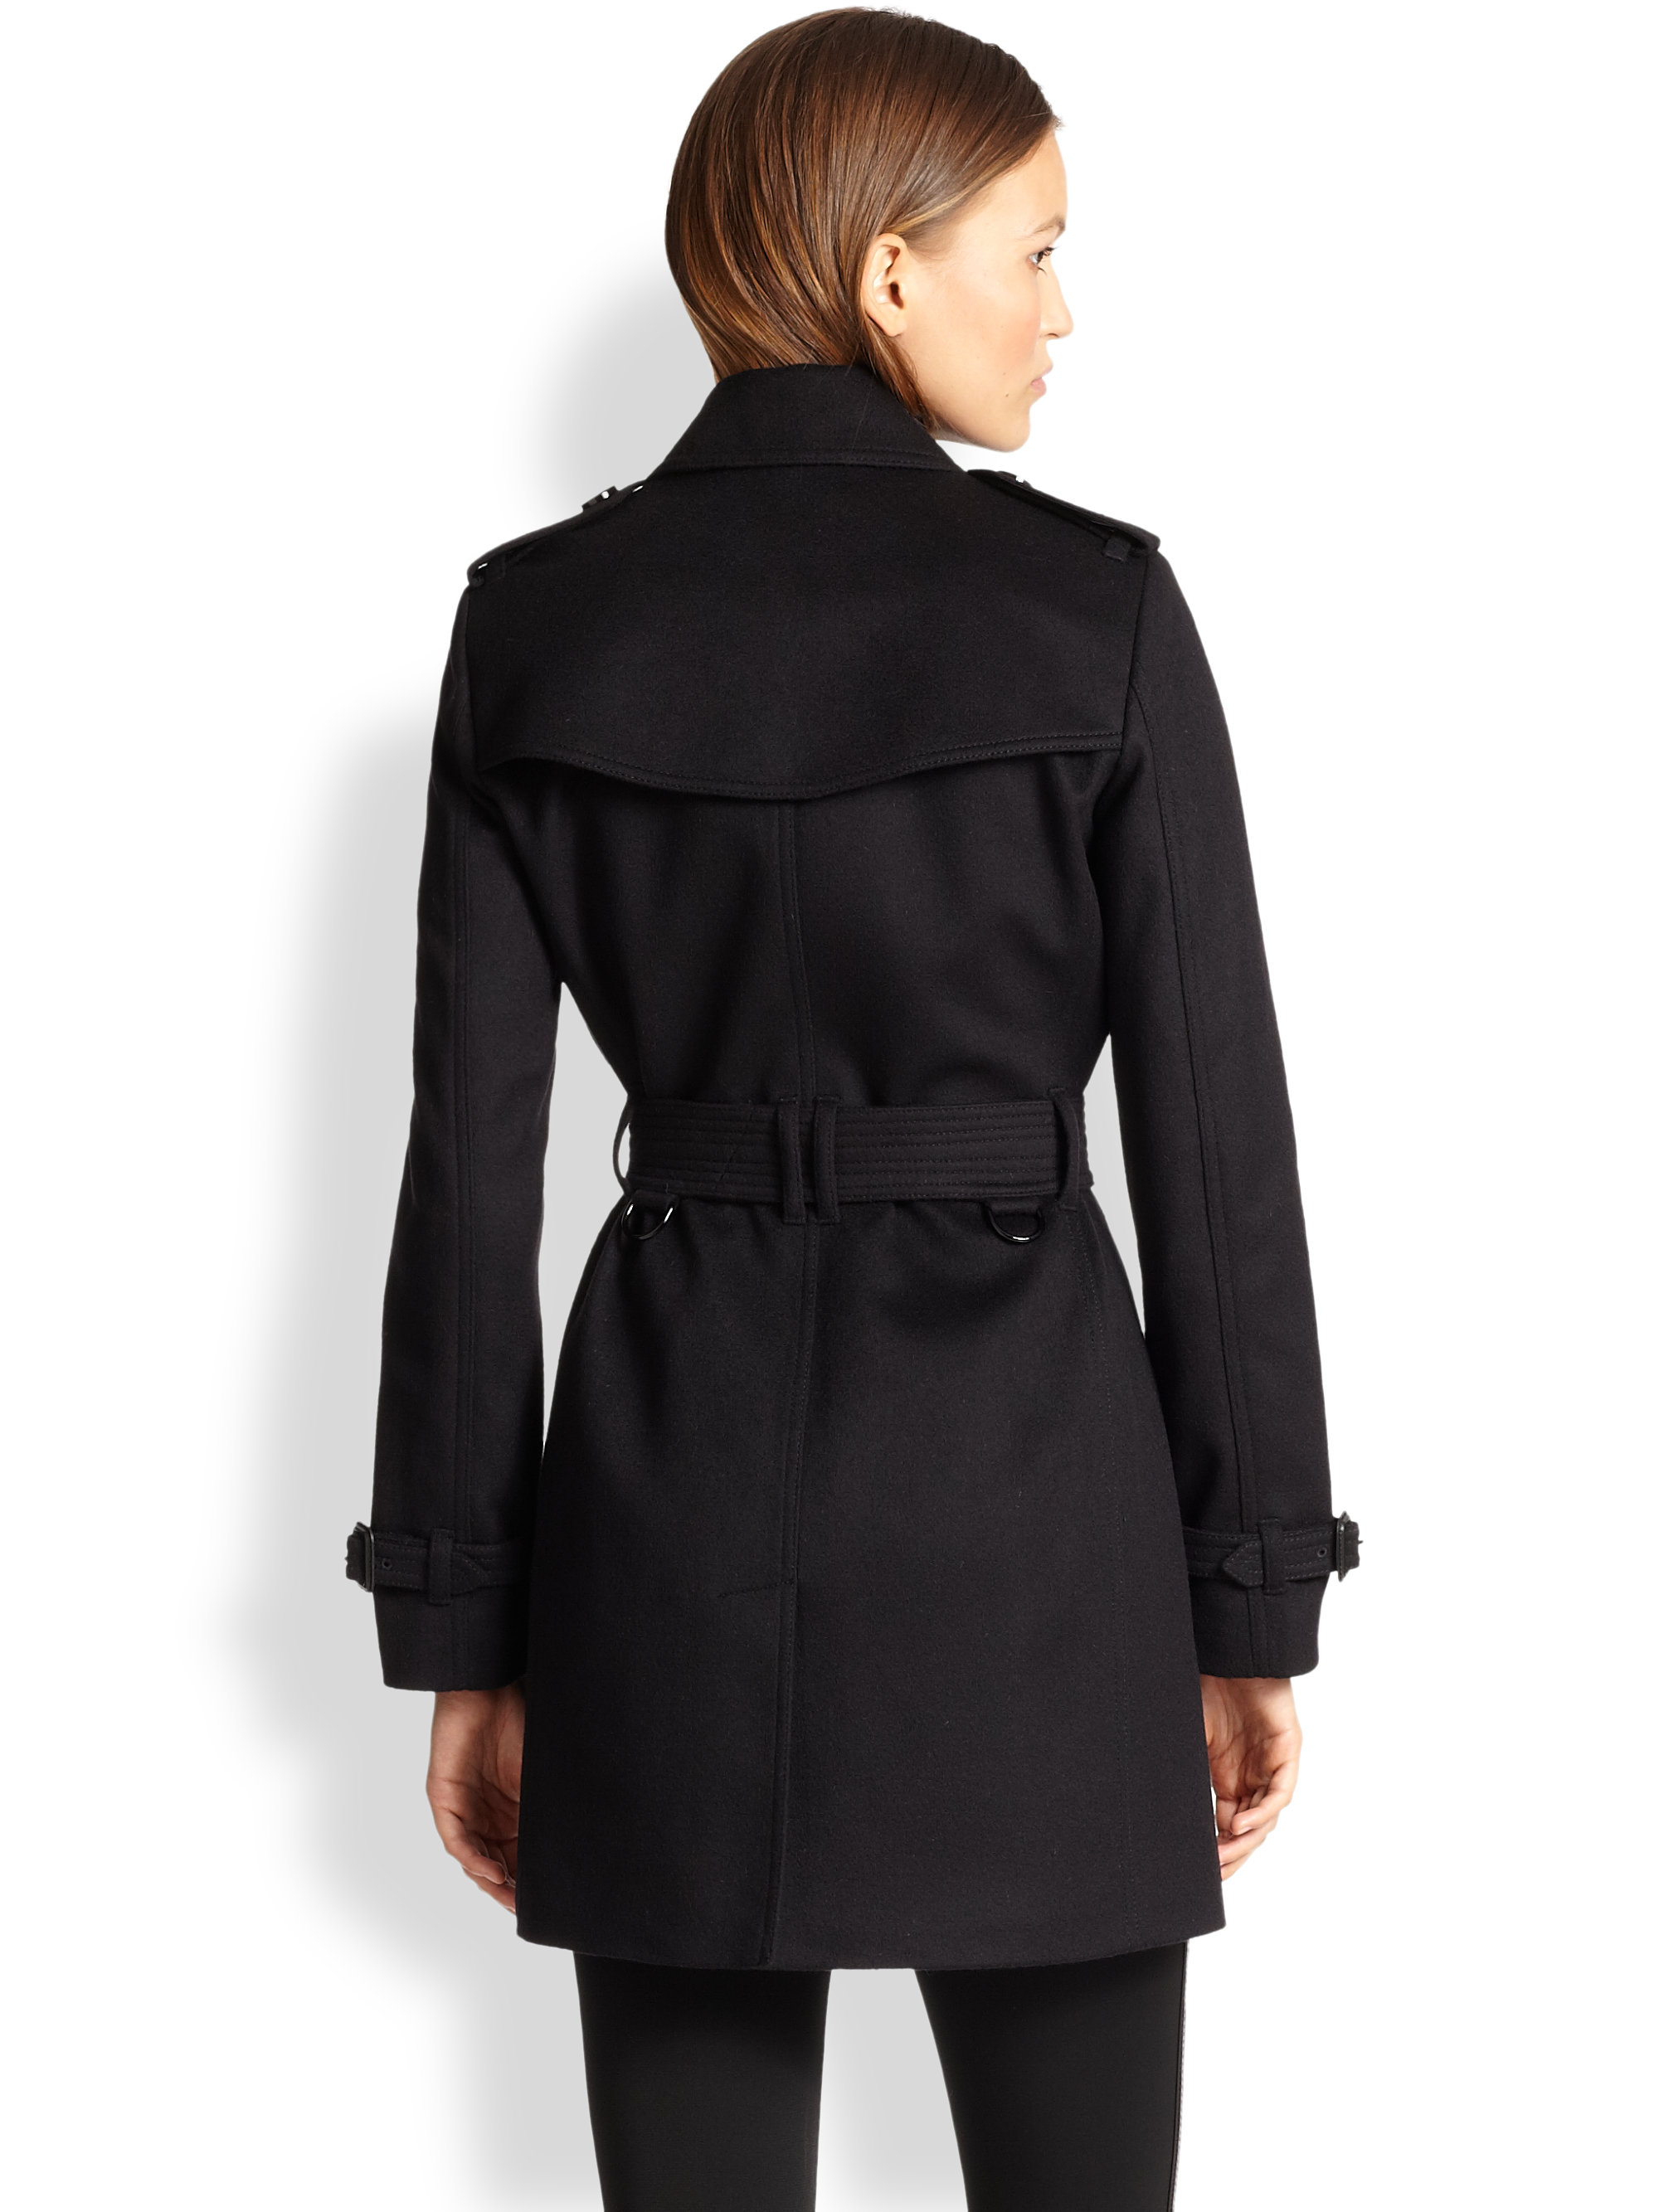 Wool \u0026 Cashmere Trench Coat in Black 